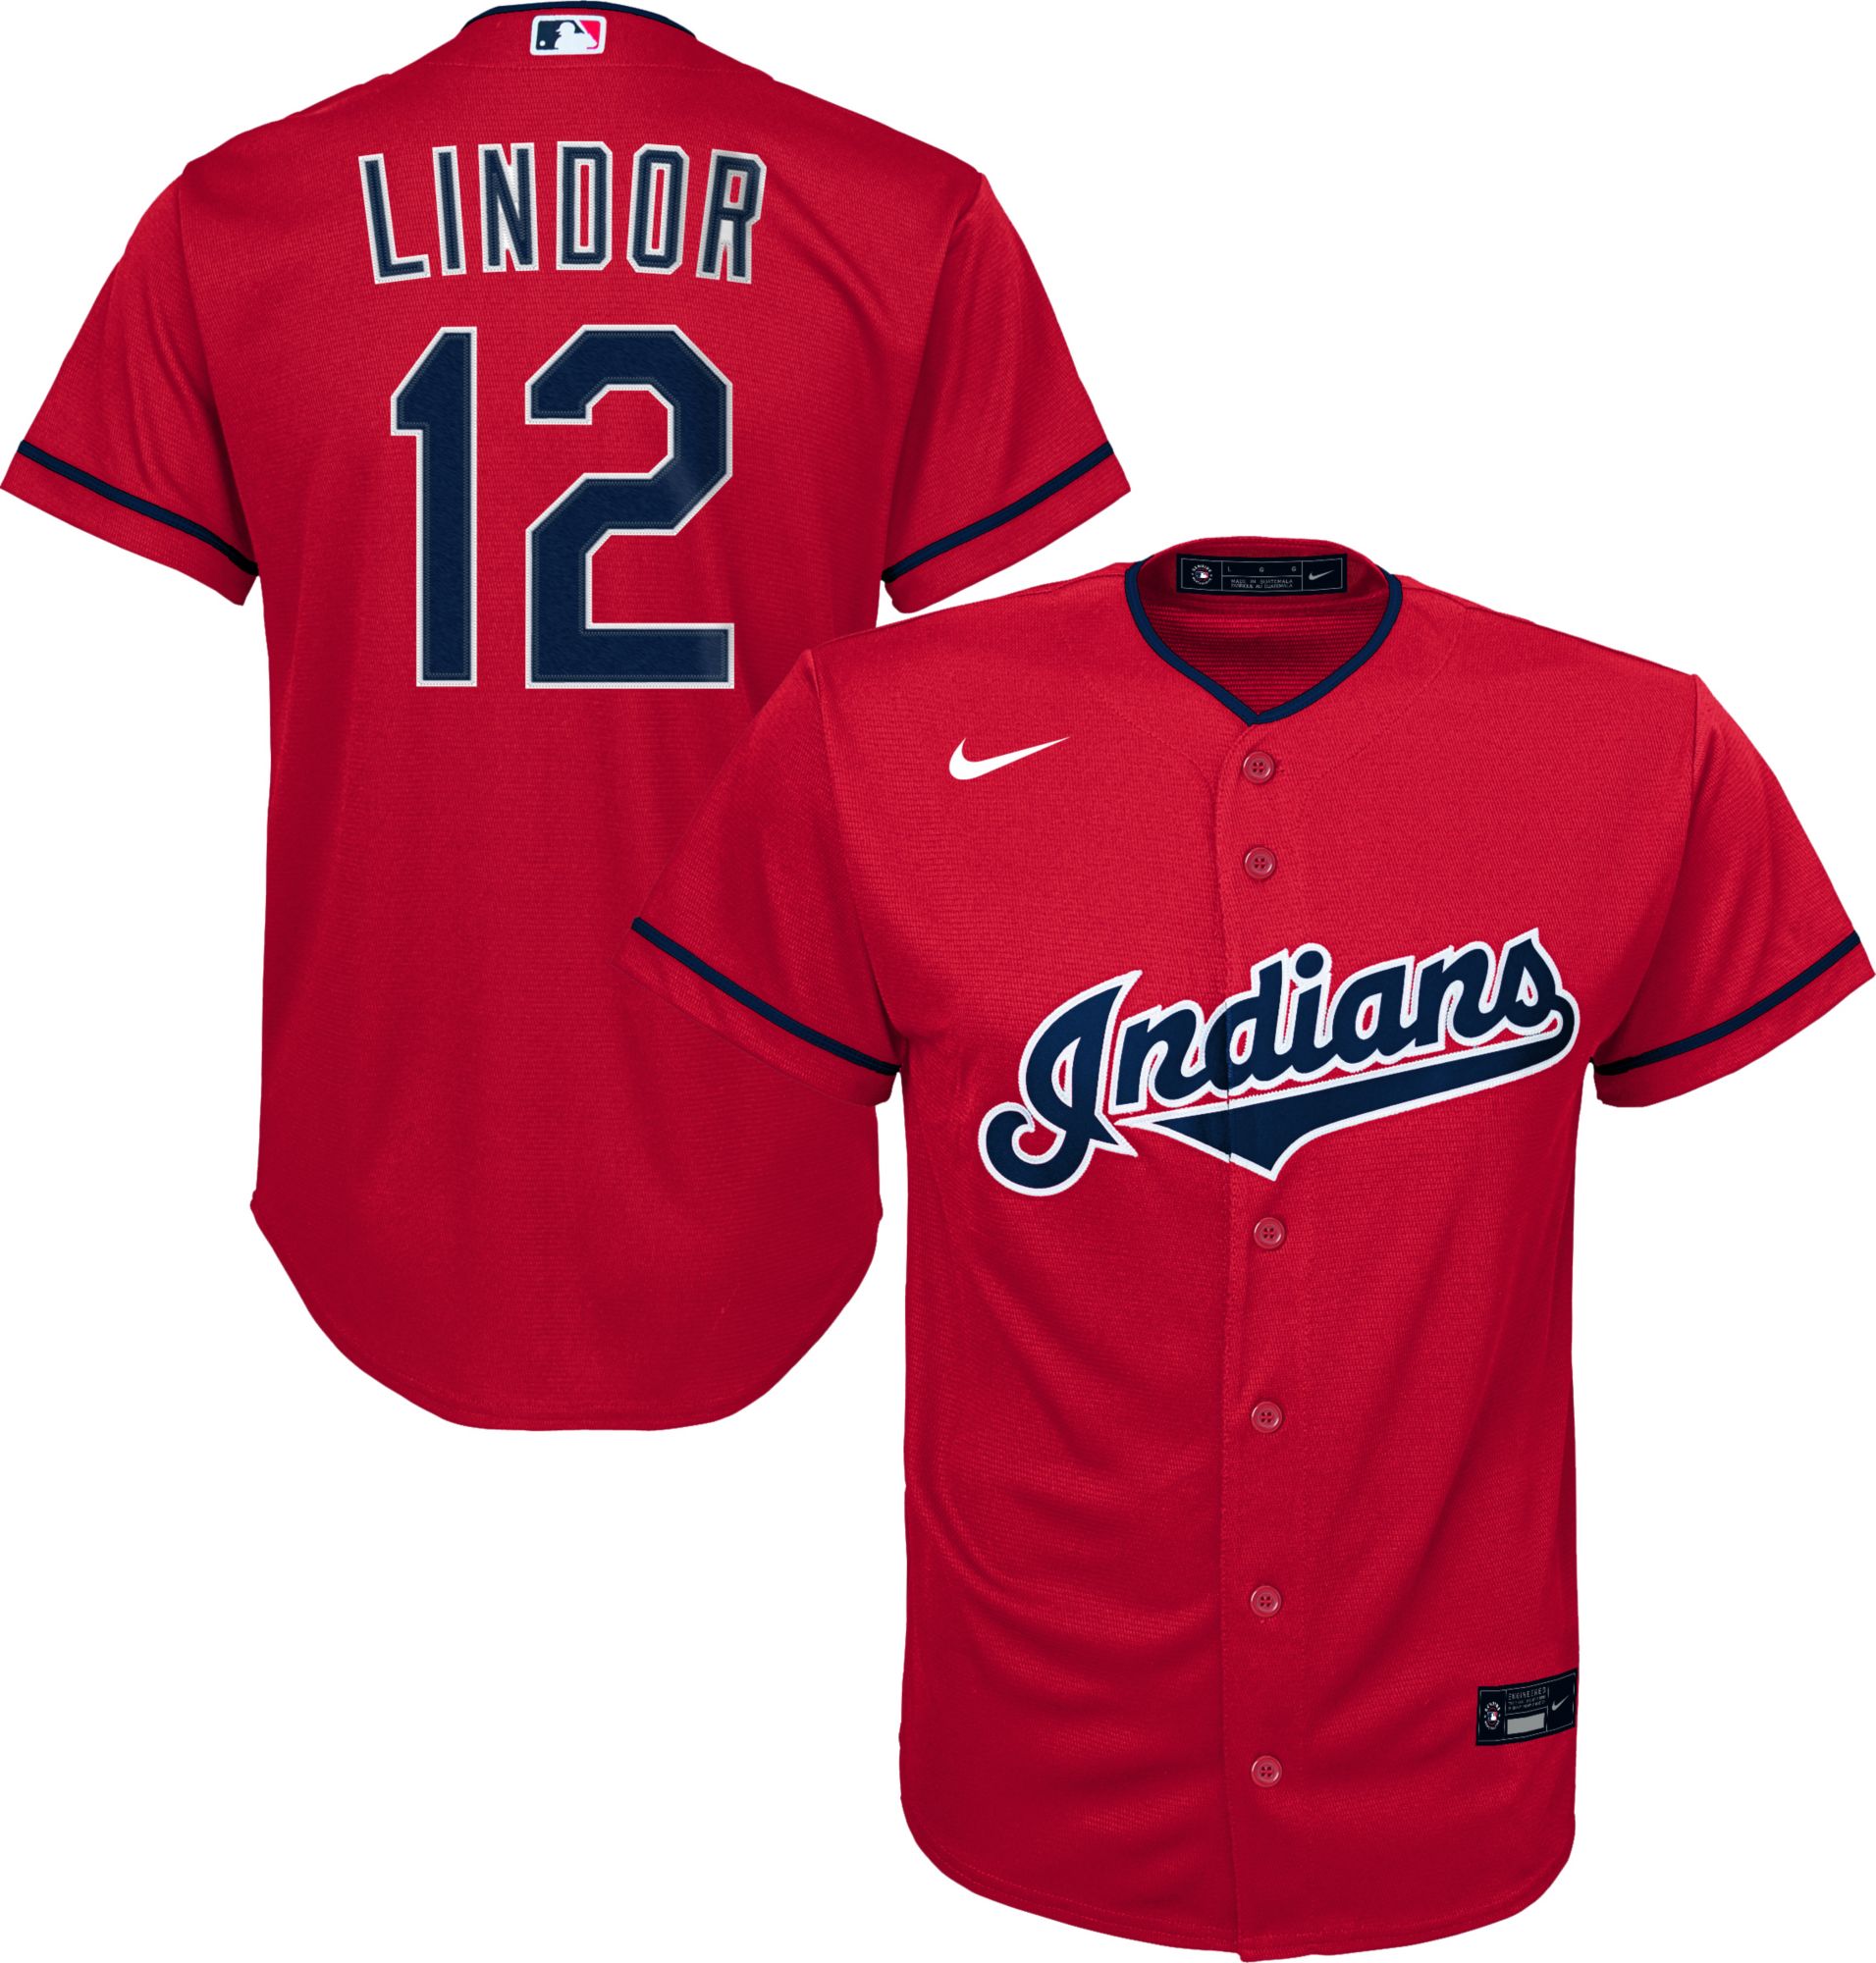 francisco lindor youth jersey